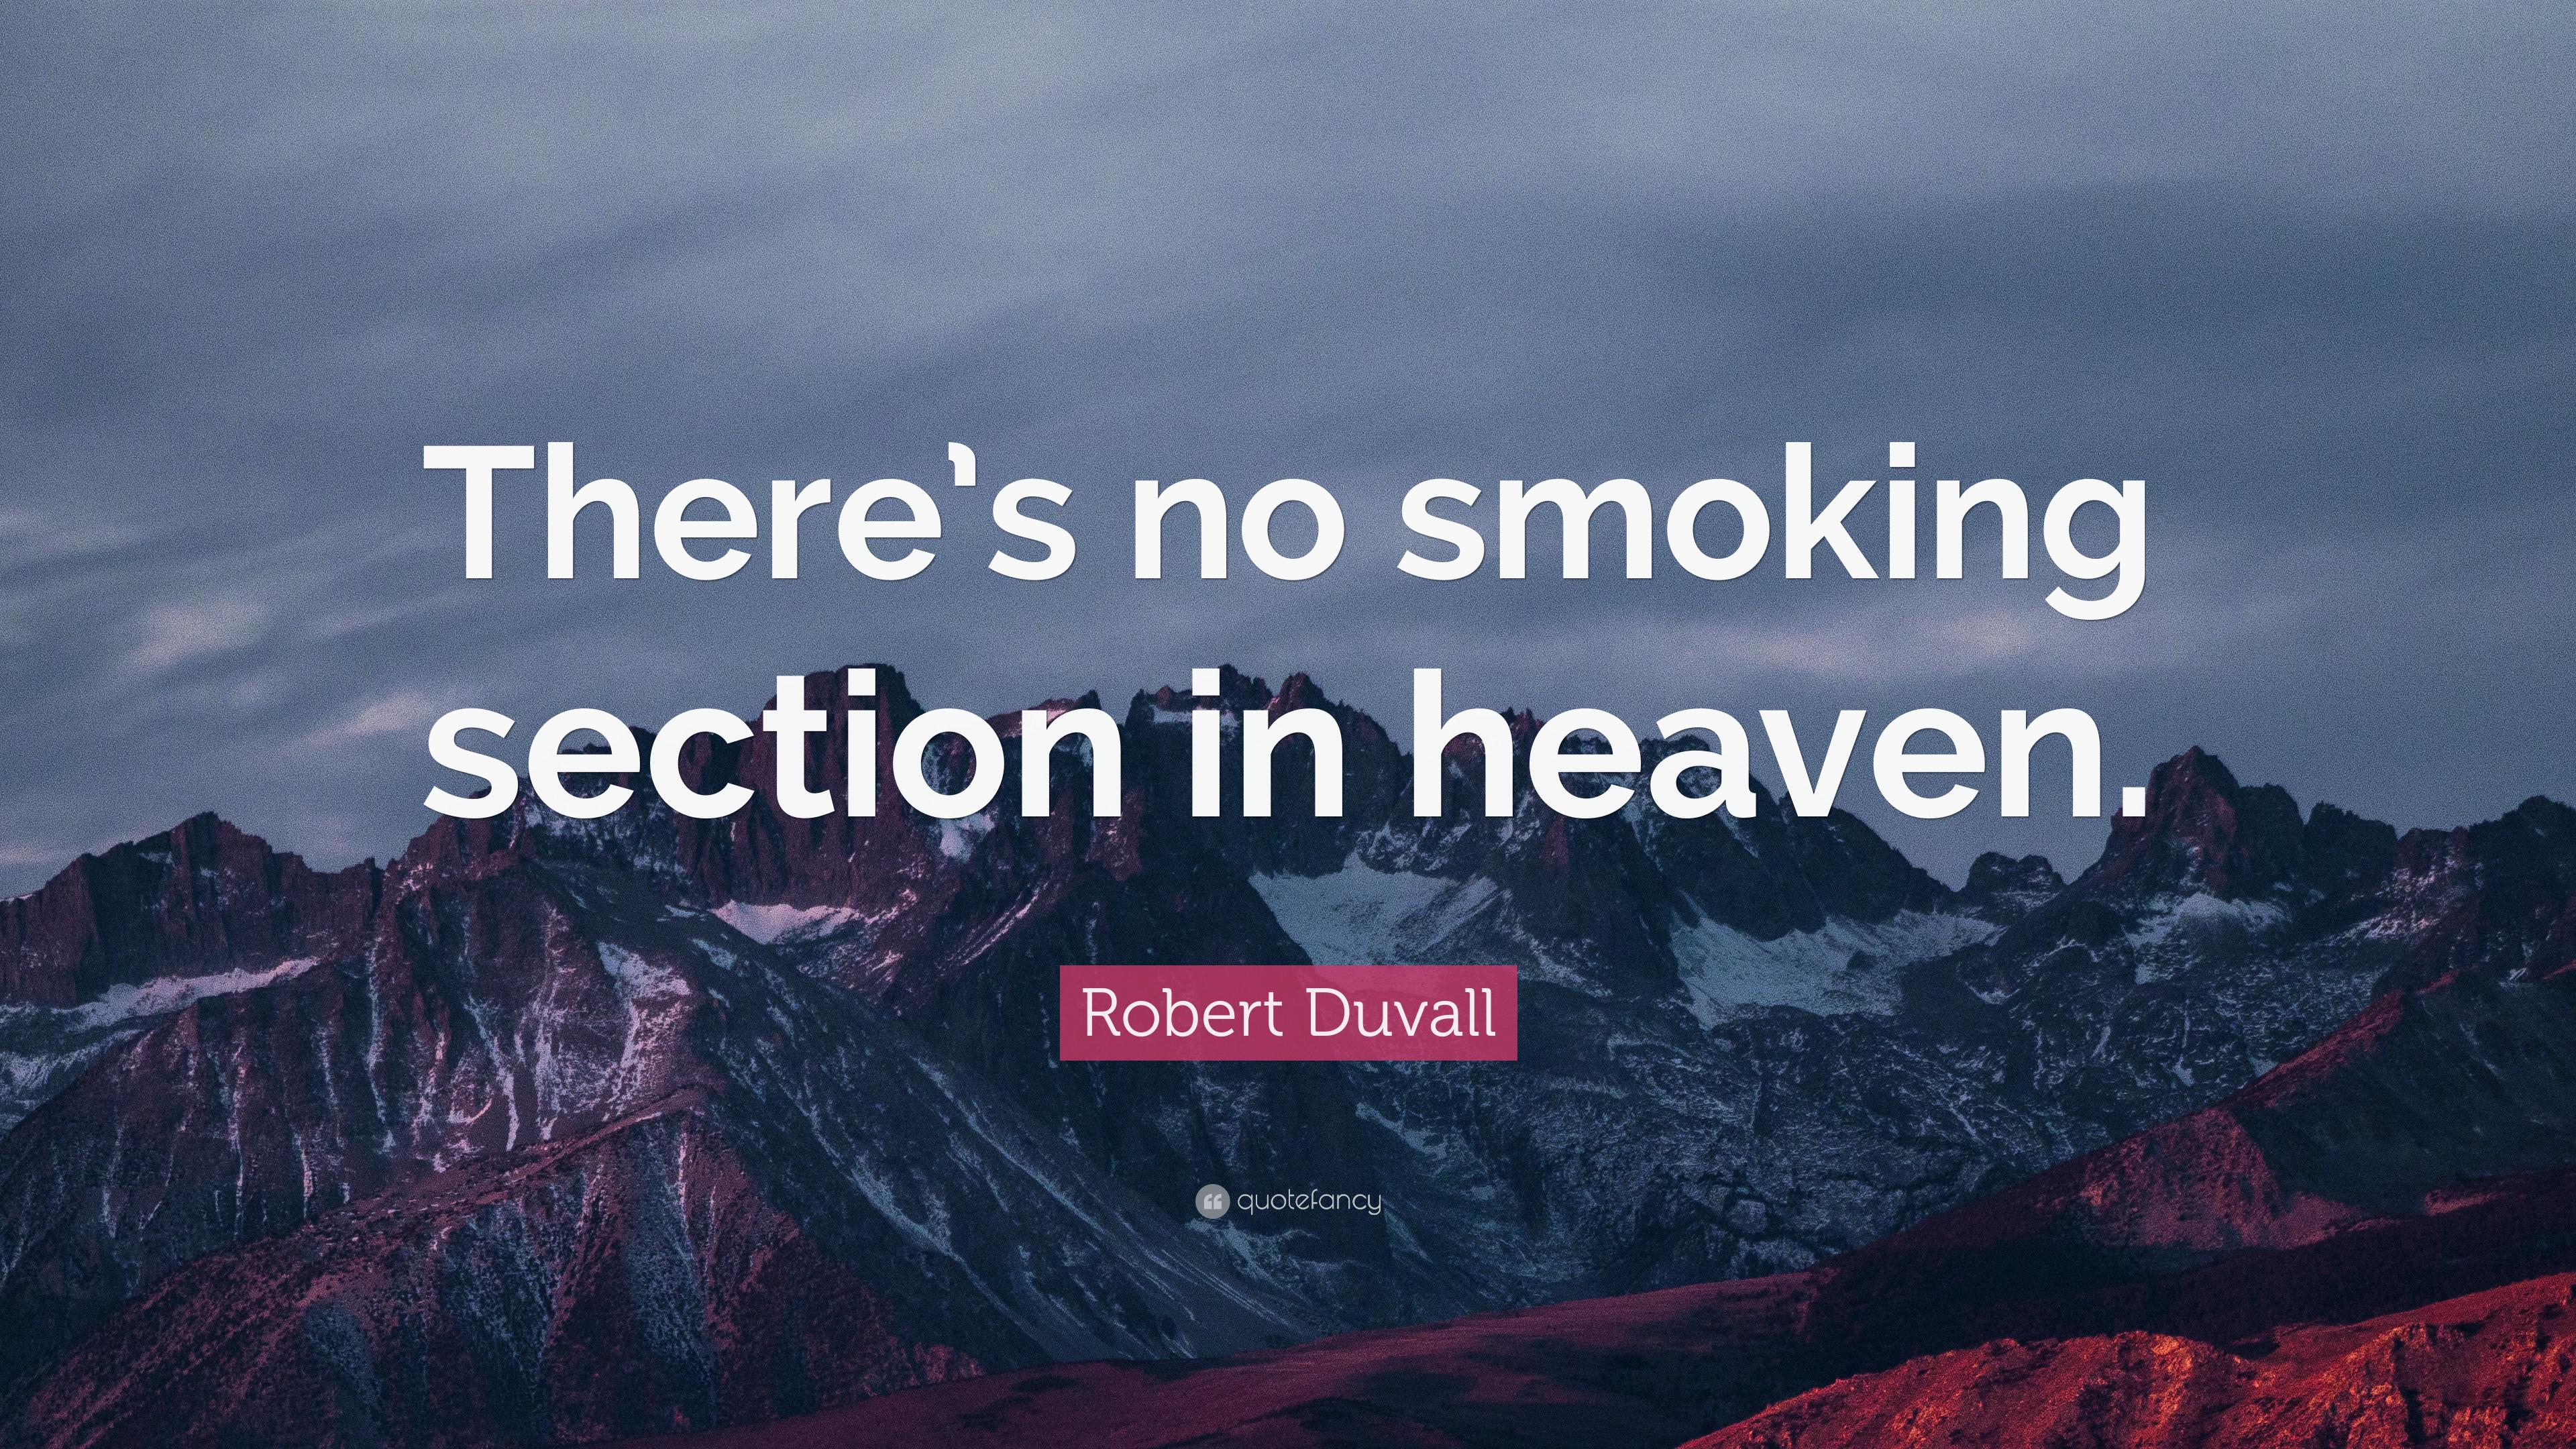 Robert Duvall Quote: “There's no smoking section in heaven.” 7